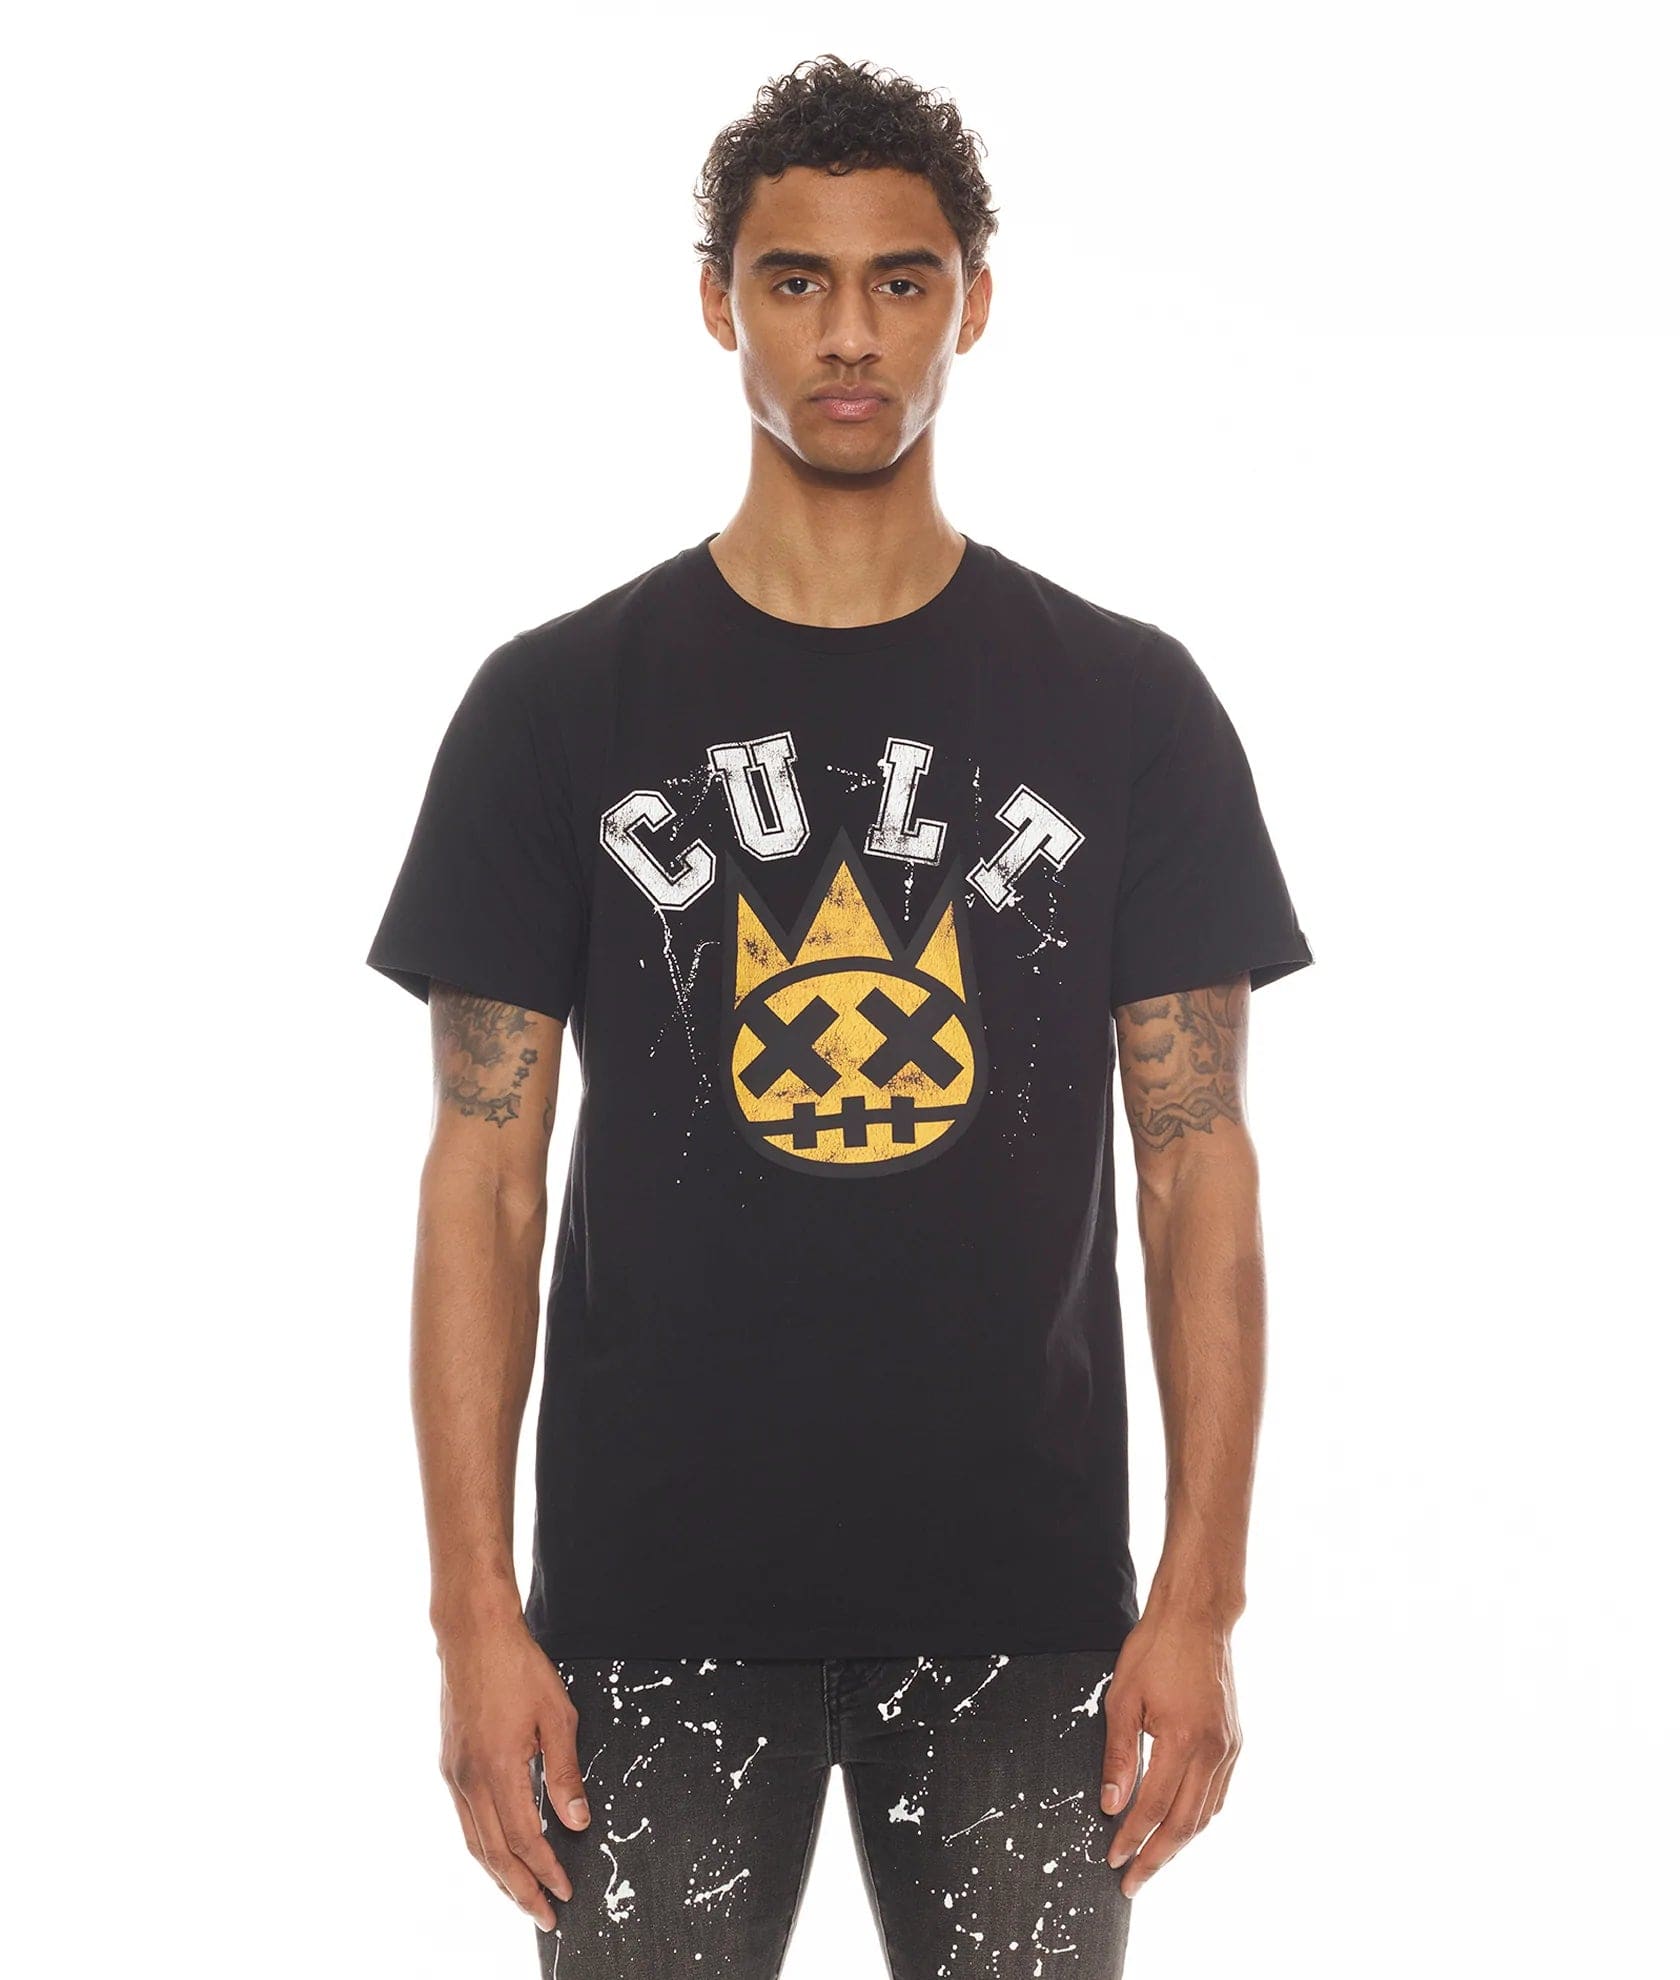 'Cult of Individuality' Short Sleeve Crew Neck Tee 